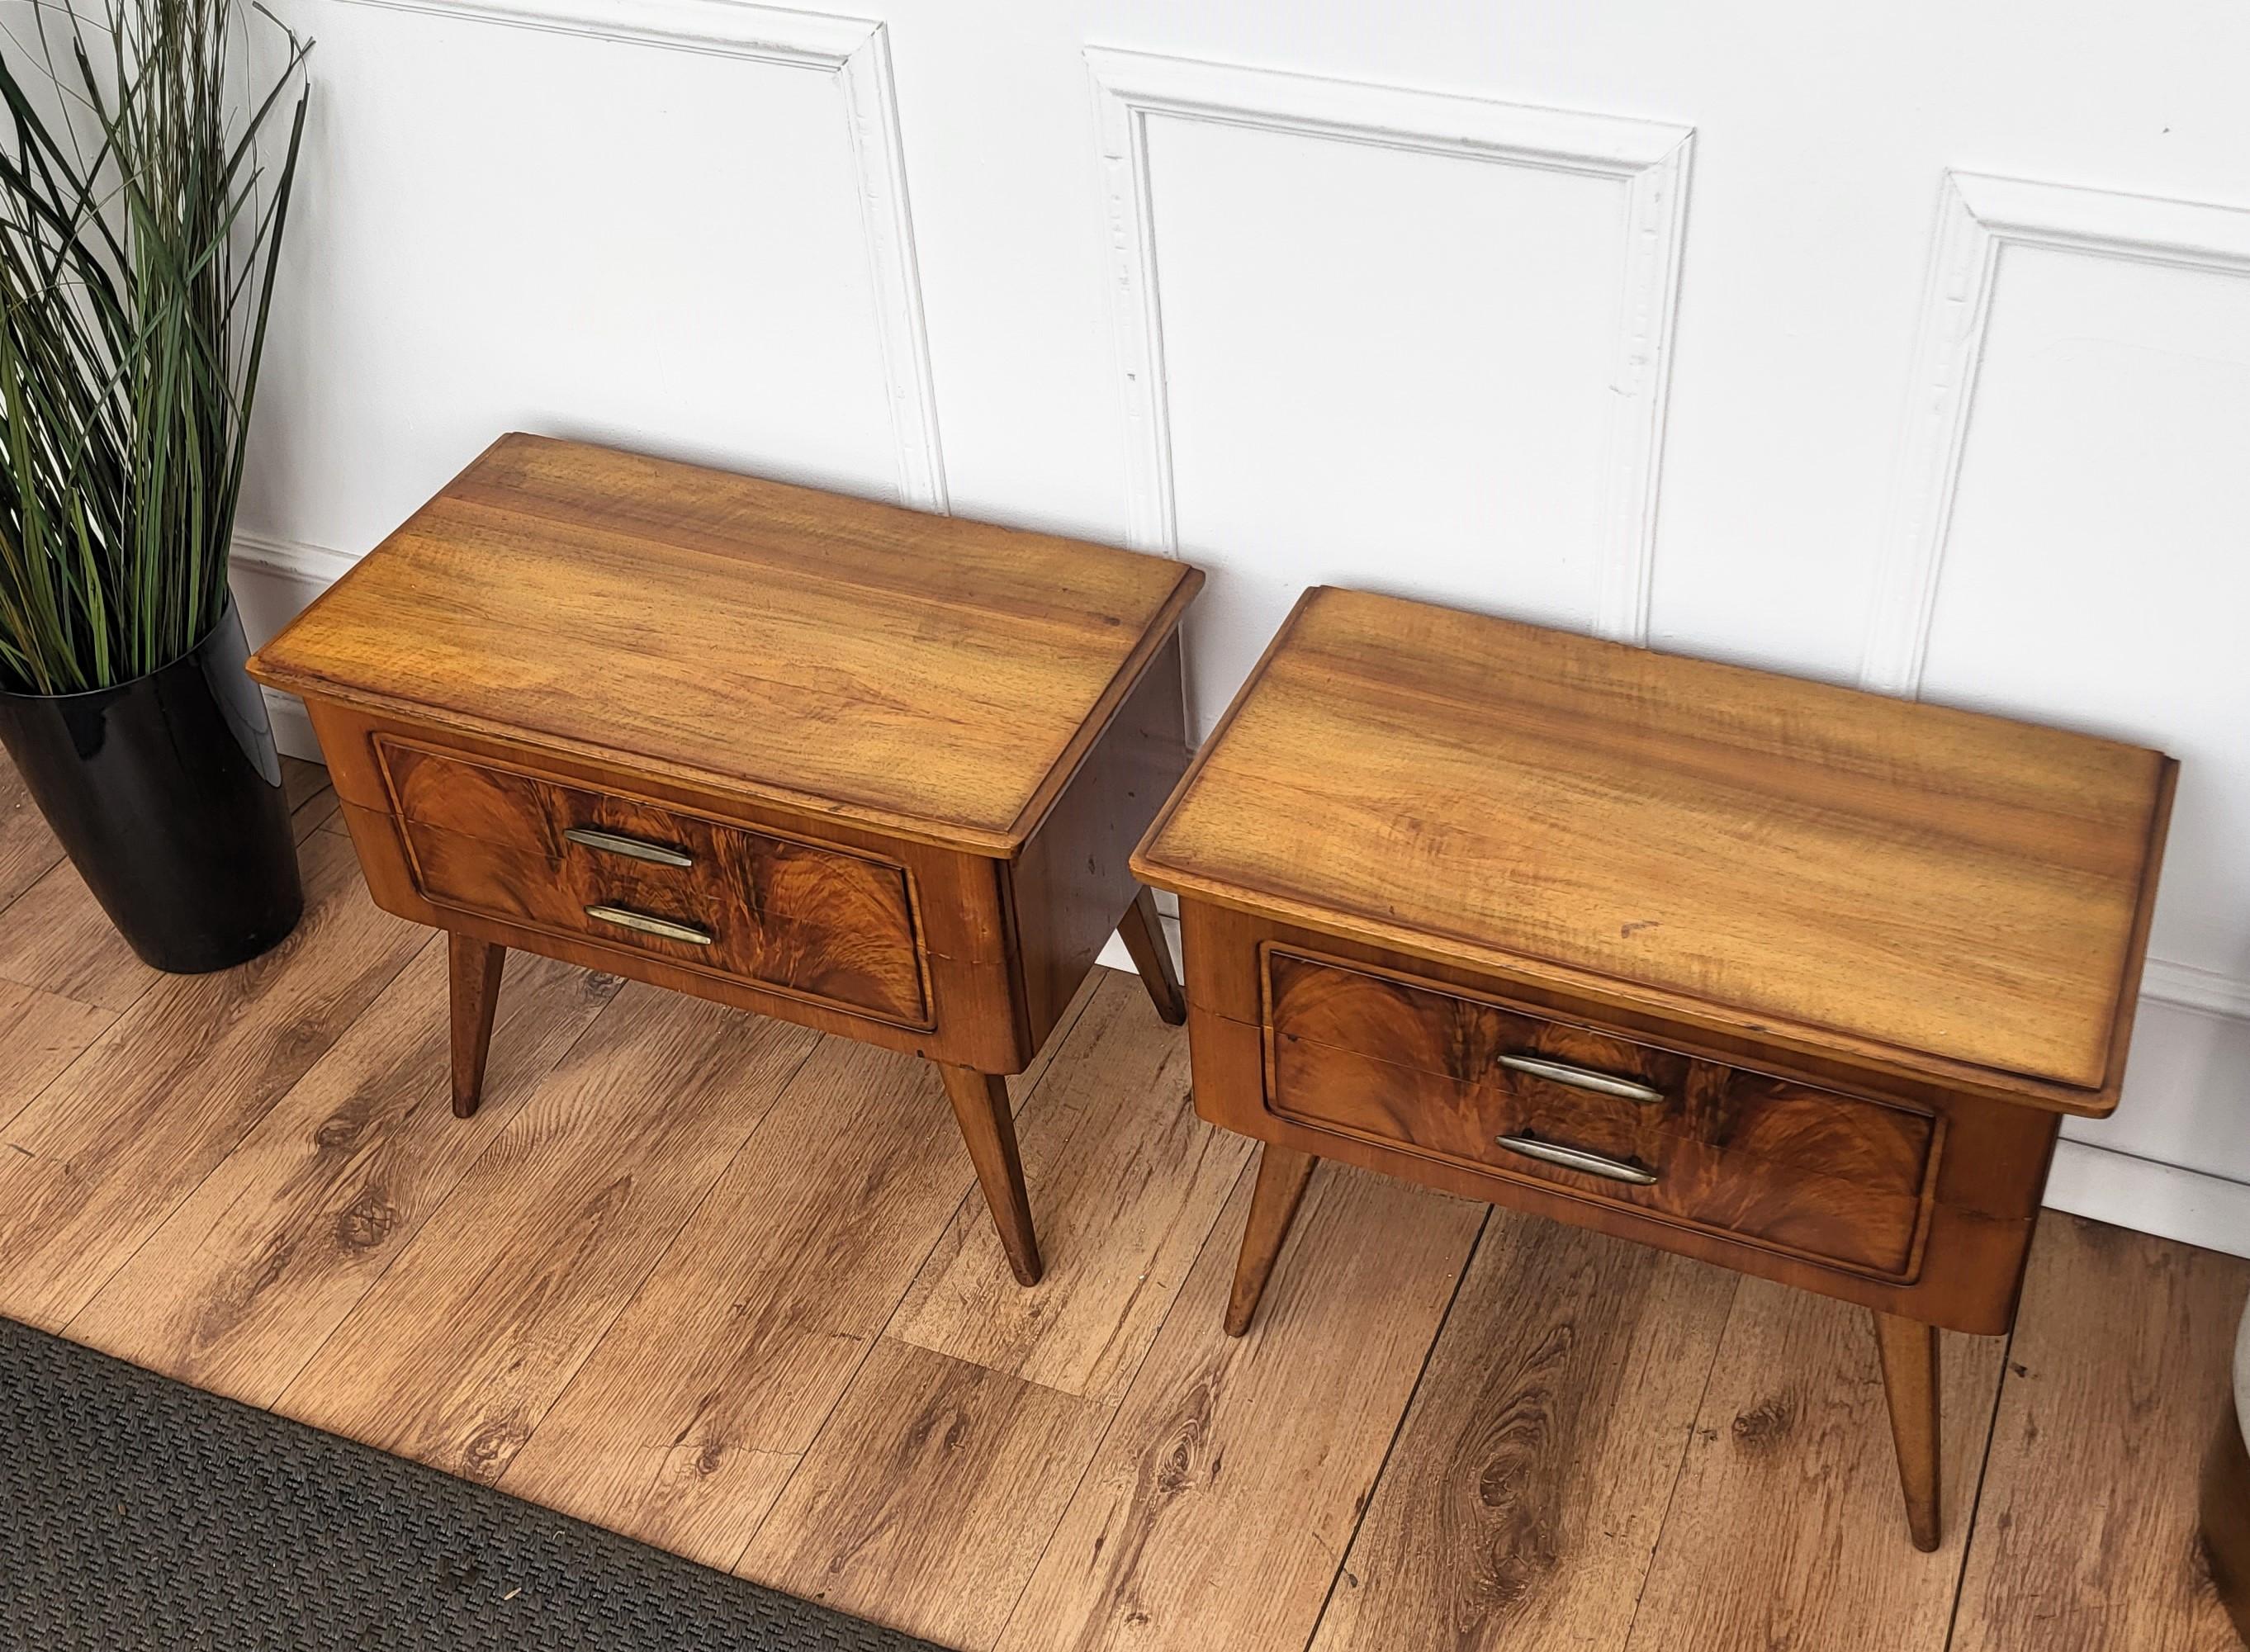 Brass Pair of Italian Mid-Century Wood Night Stands Bedside Tables For Sale